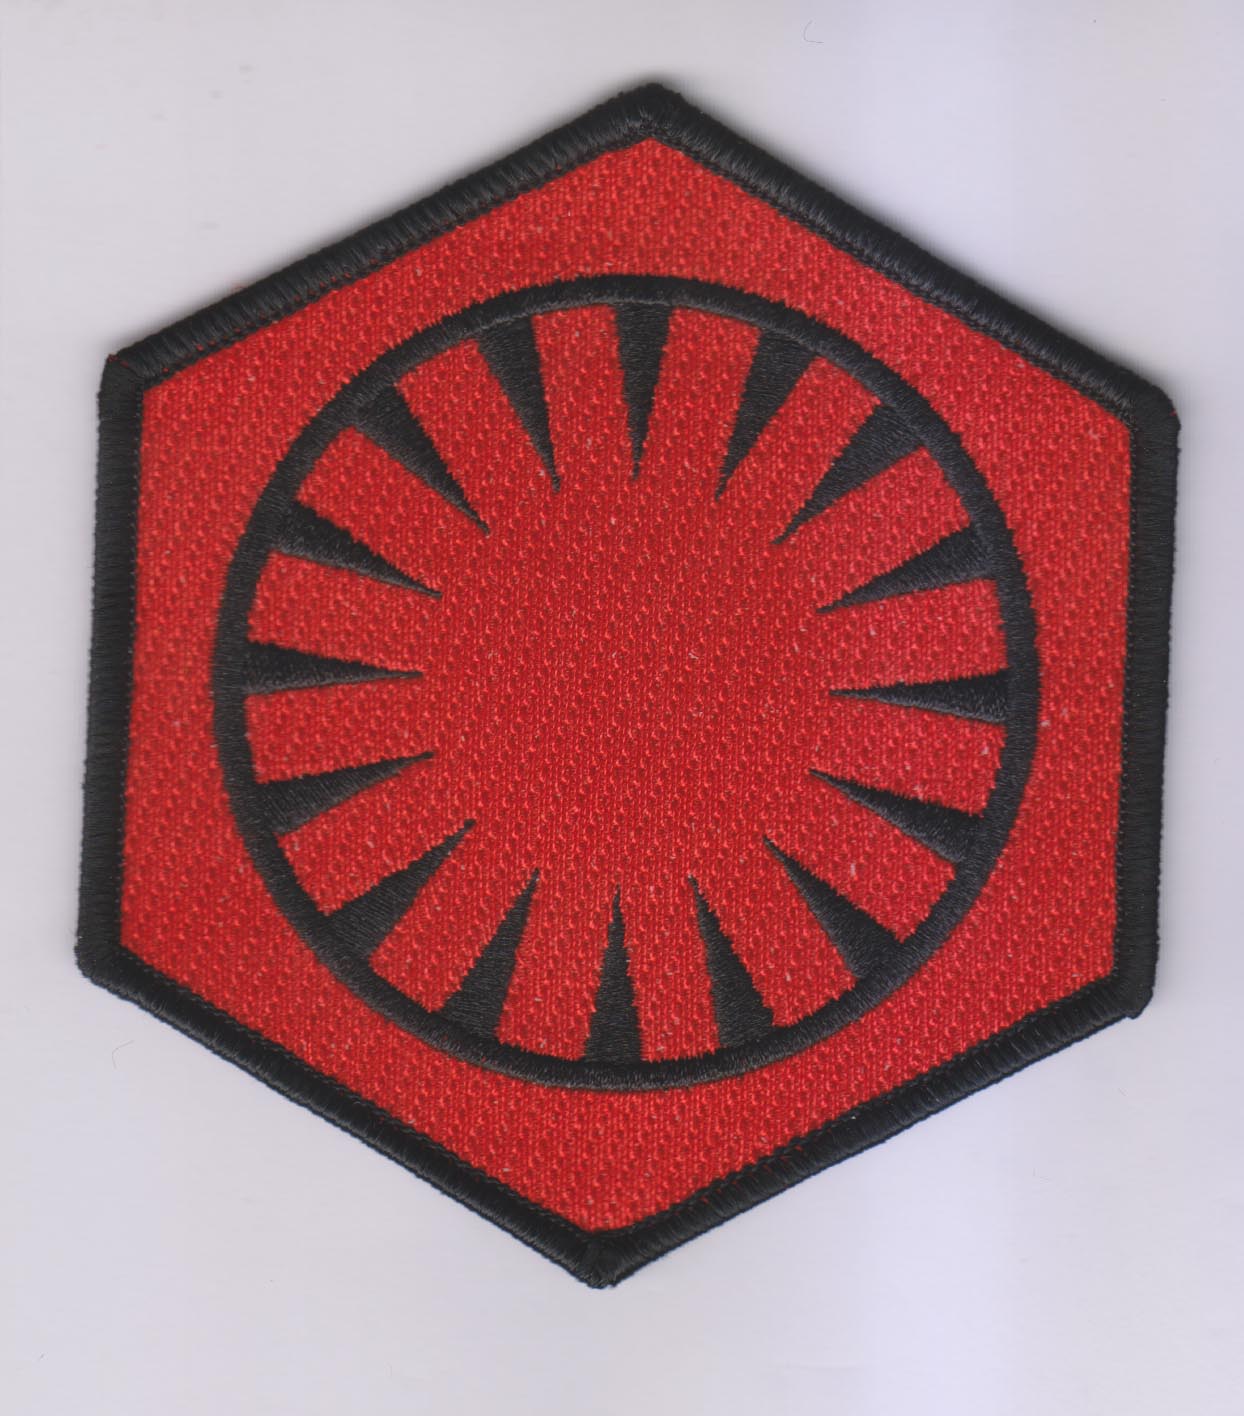 SWPA-FC-11 Star Wars Stormtrooper Red Cog 3" Embroidered Patch USA Mailed 